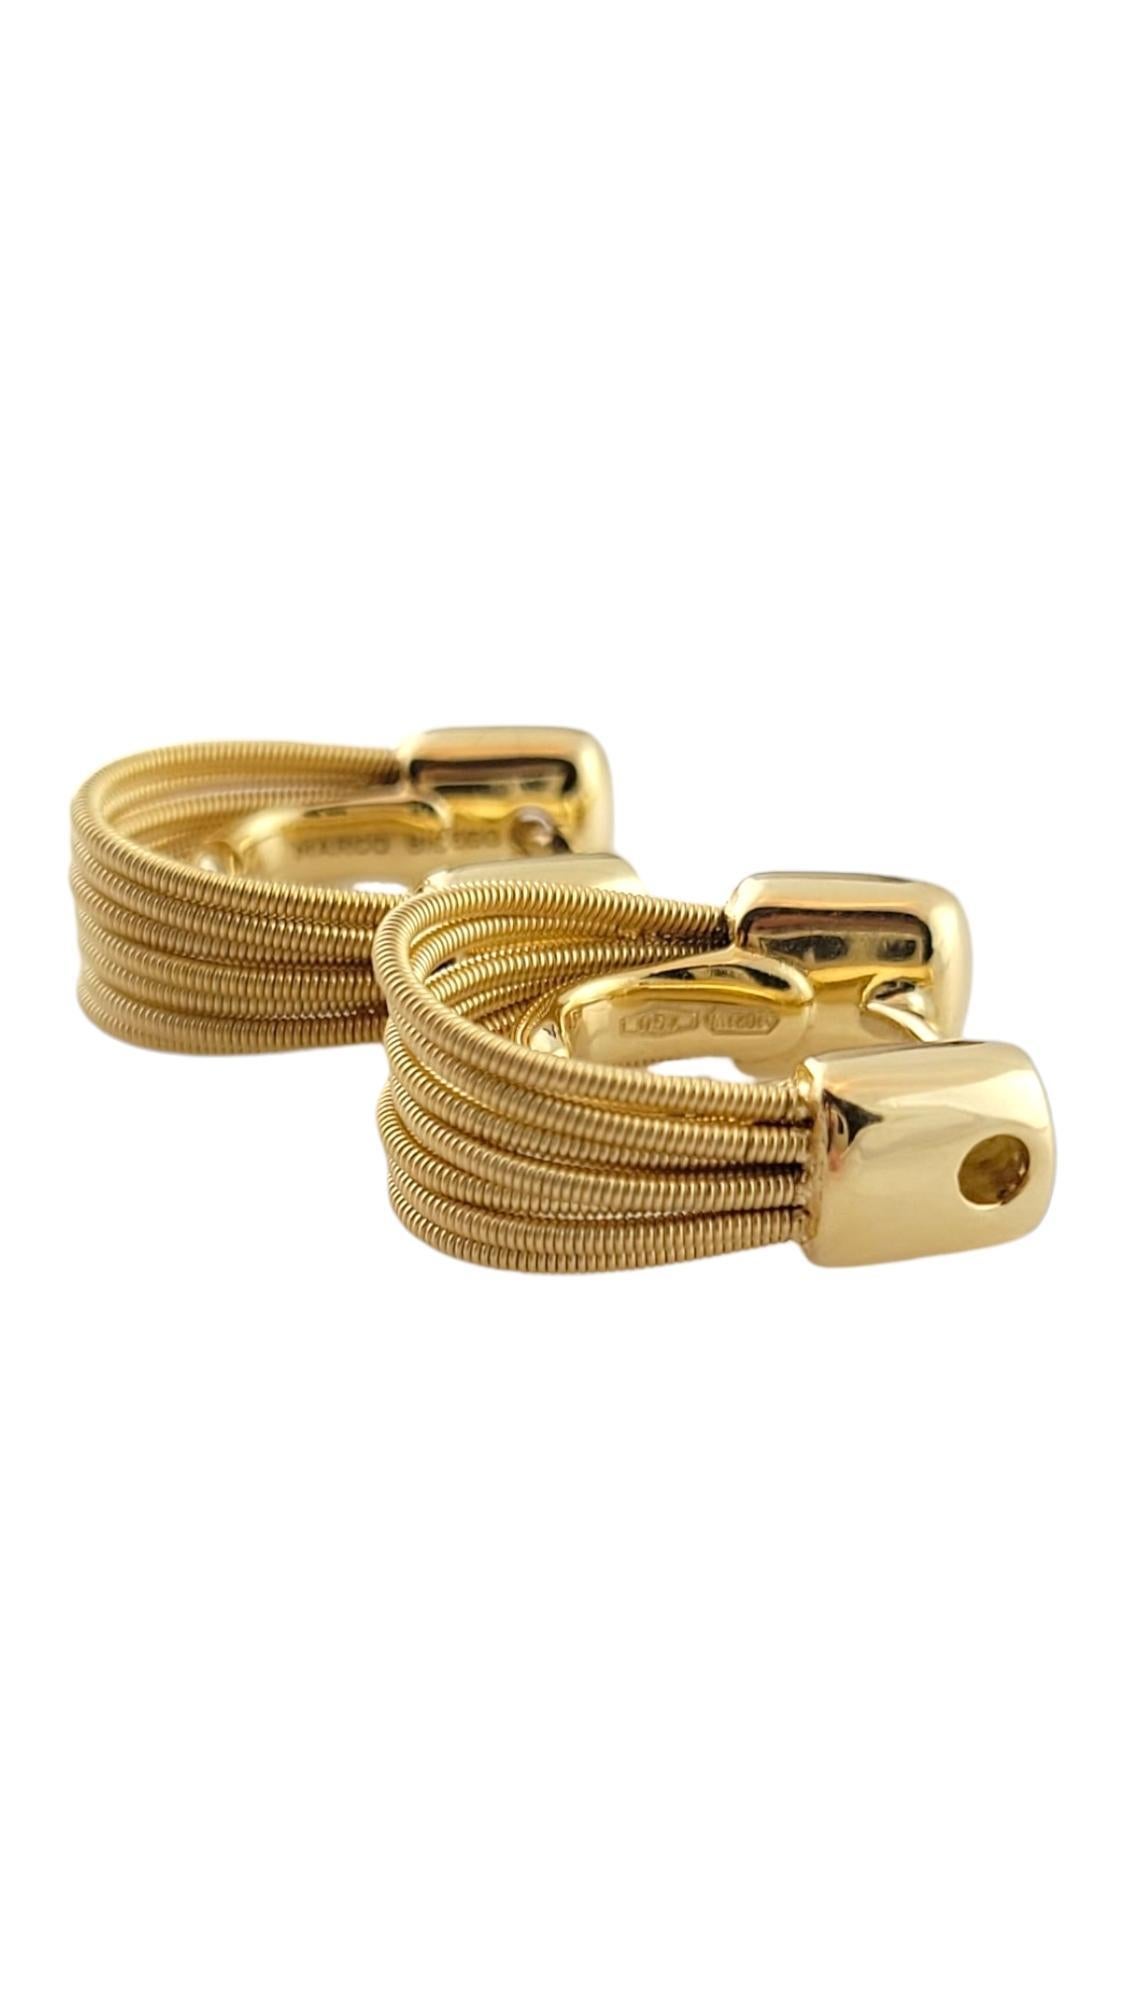 14K Yellow Gold Marco Bicego Multi Strand Cable Hoop Earrings

This gorgeous set of Marco Bicego designer hoop earrings have a breathtaking multi strand cable design that would look beautiful on anyone!

Size: 17.9mm X 15.29mm X 7.53mm

Weight: 10.6